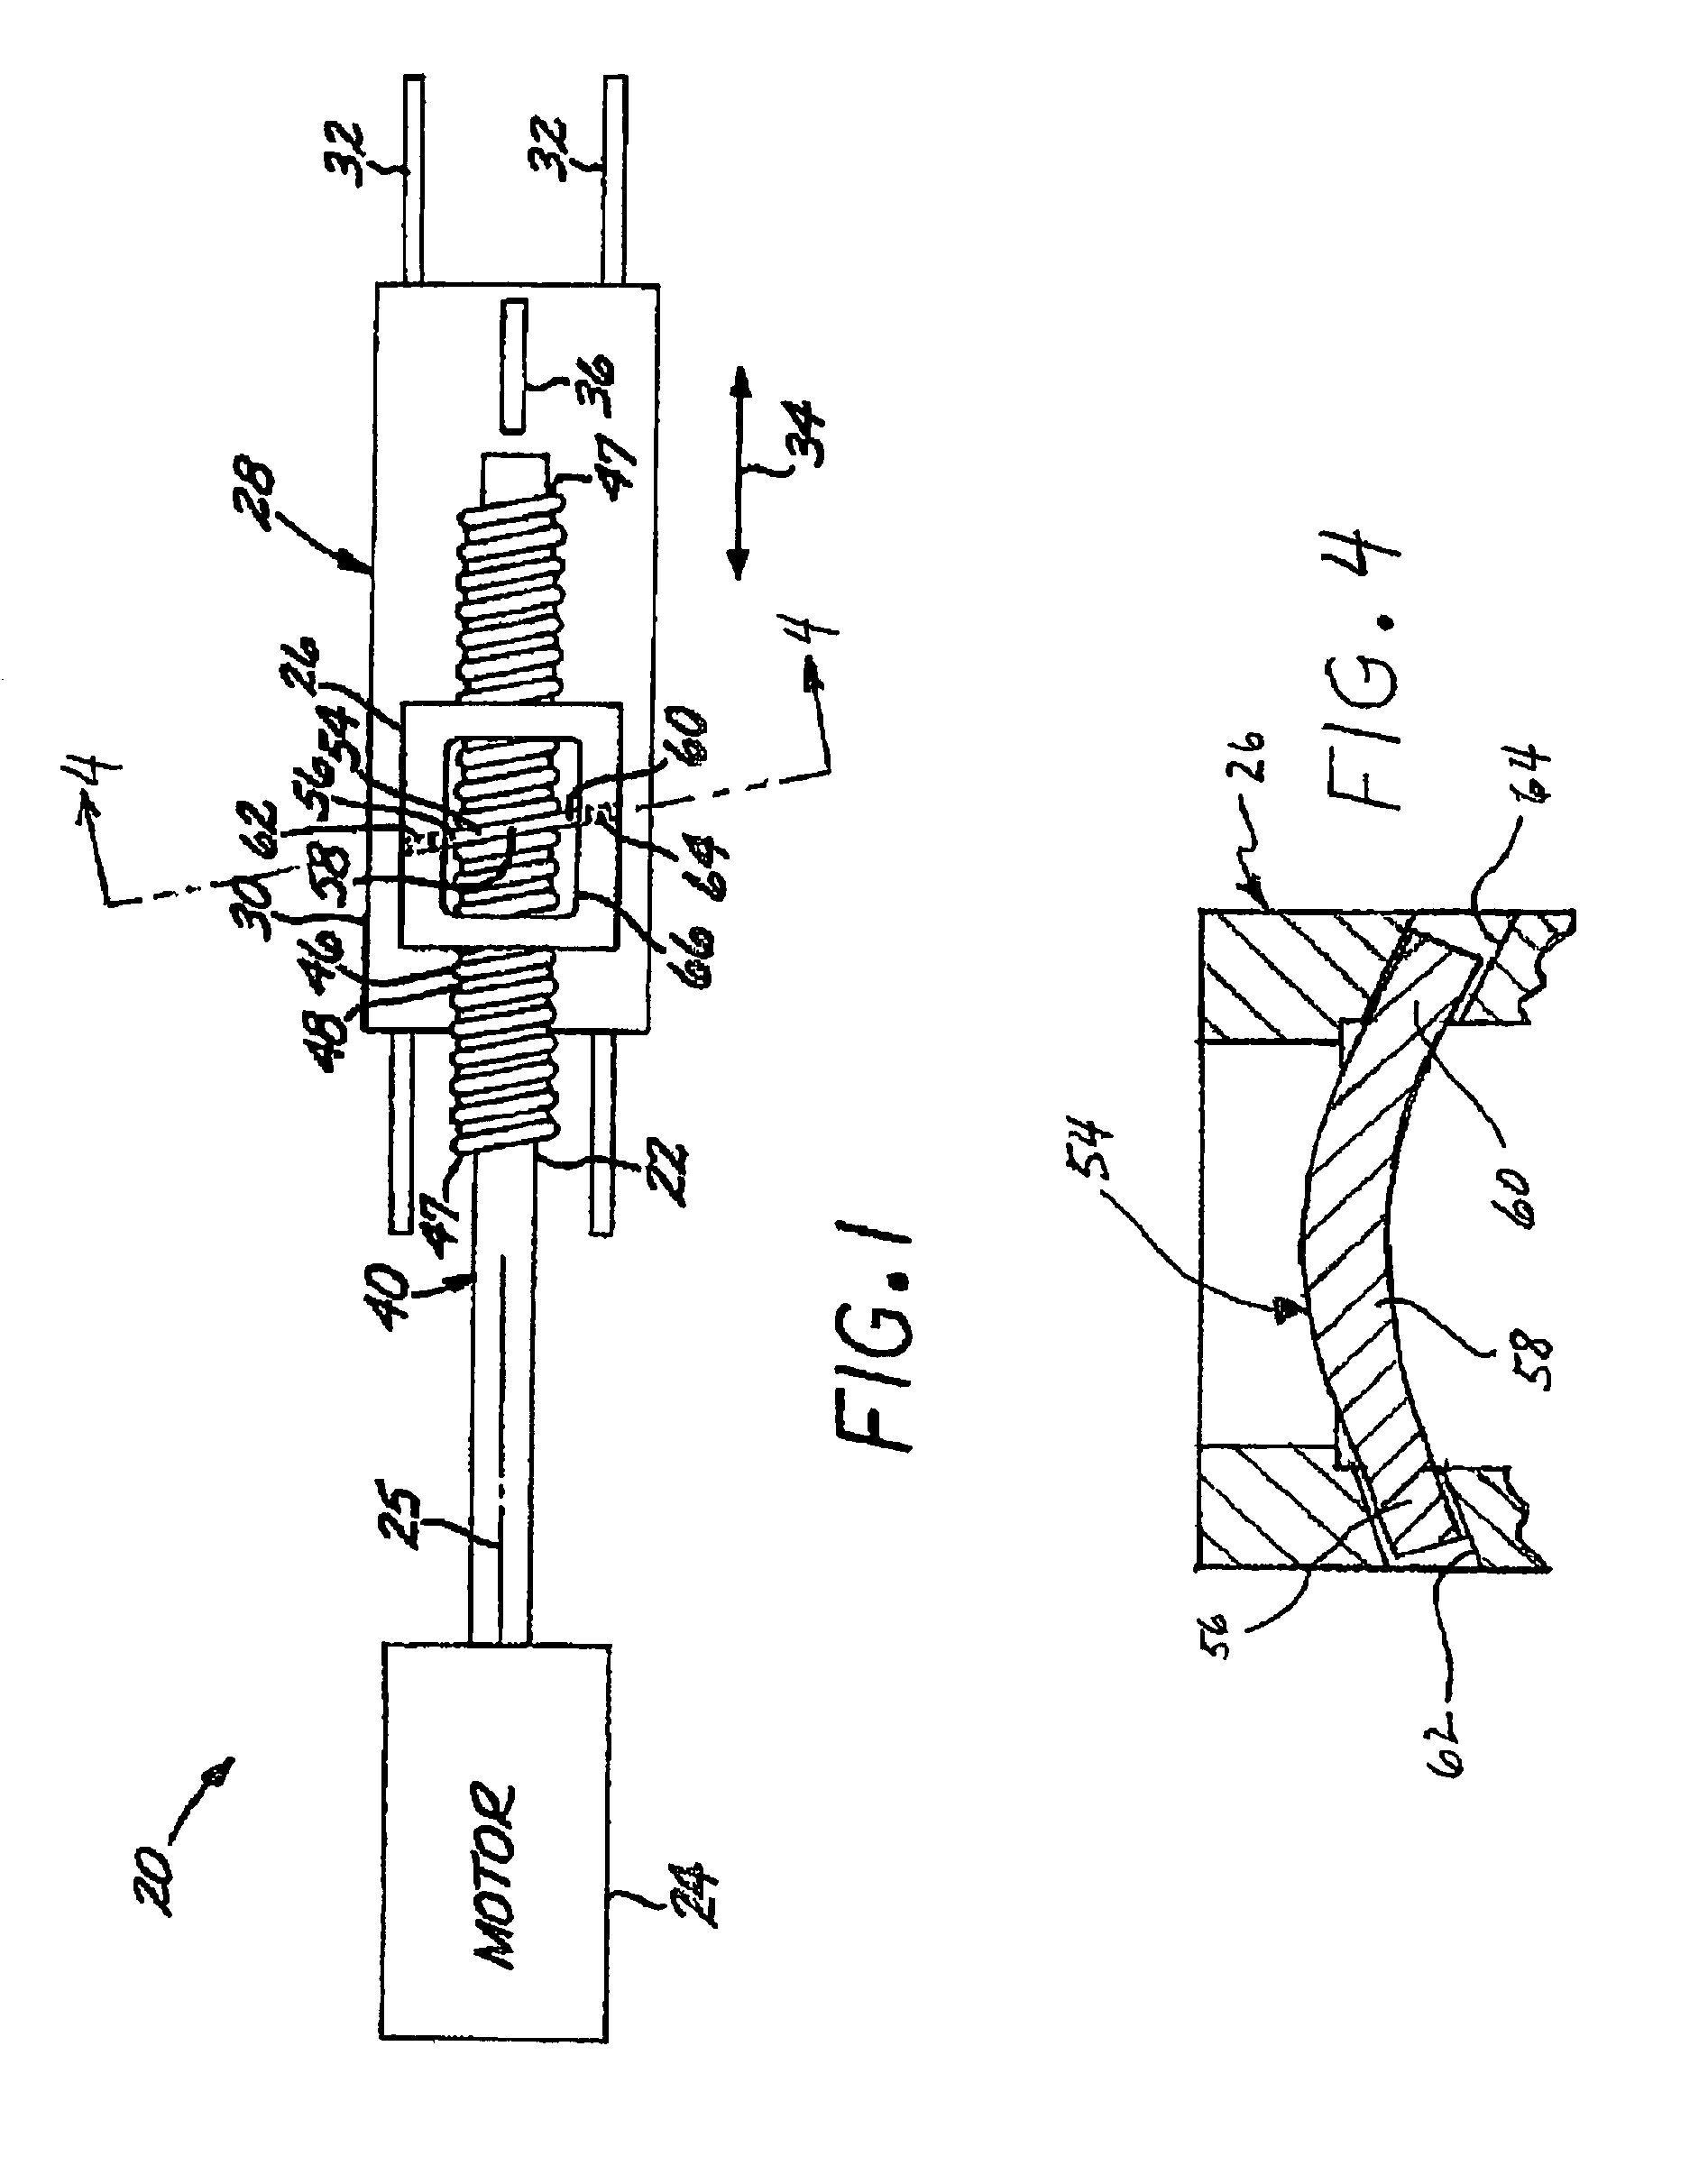 Leadscrew assembly with a wire-wound leadscrew and a spring-pin engagement of a drive nut to the leadscrew